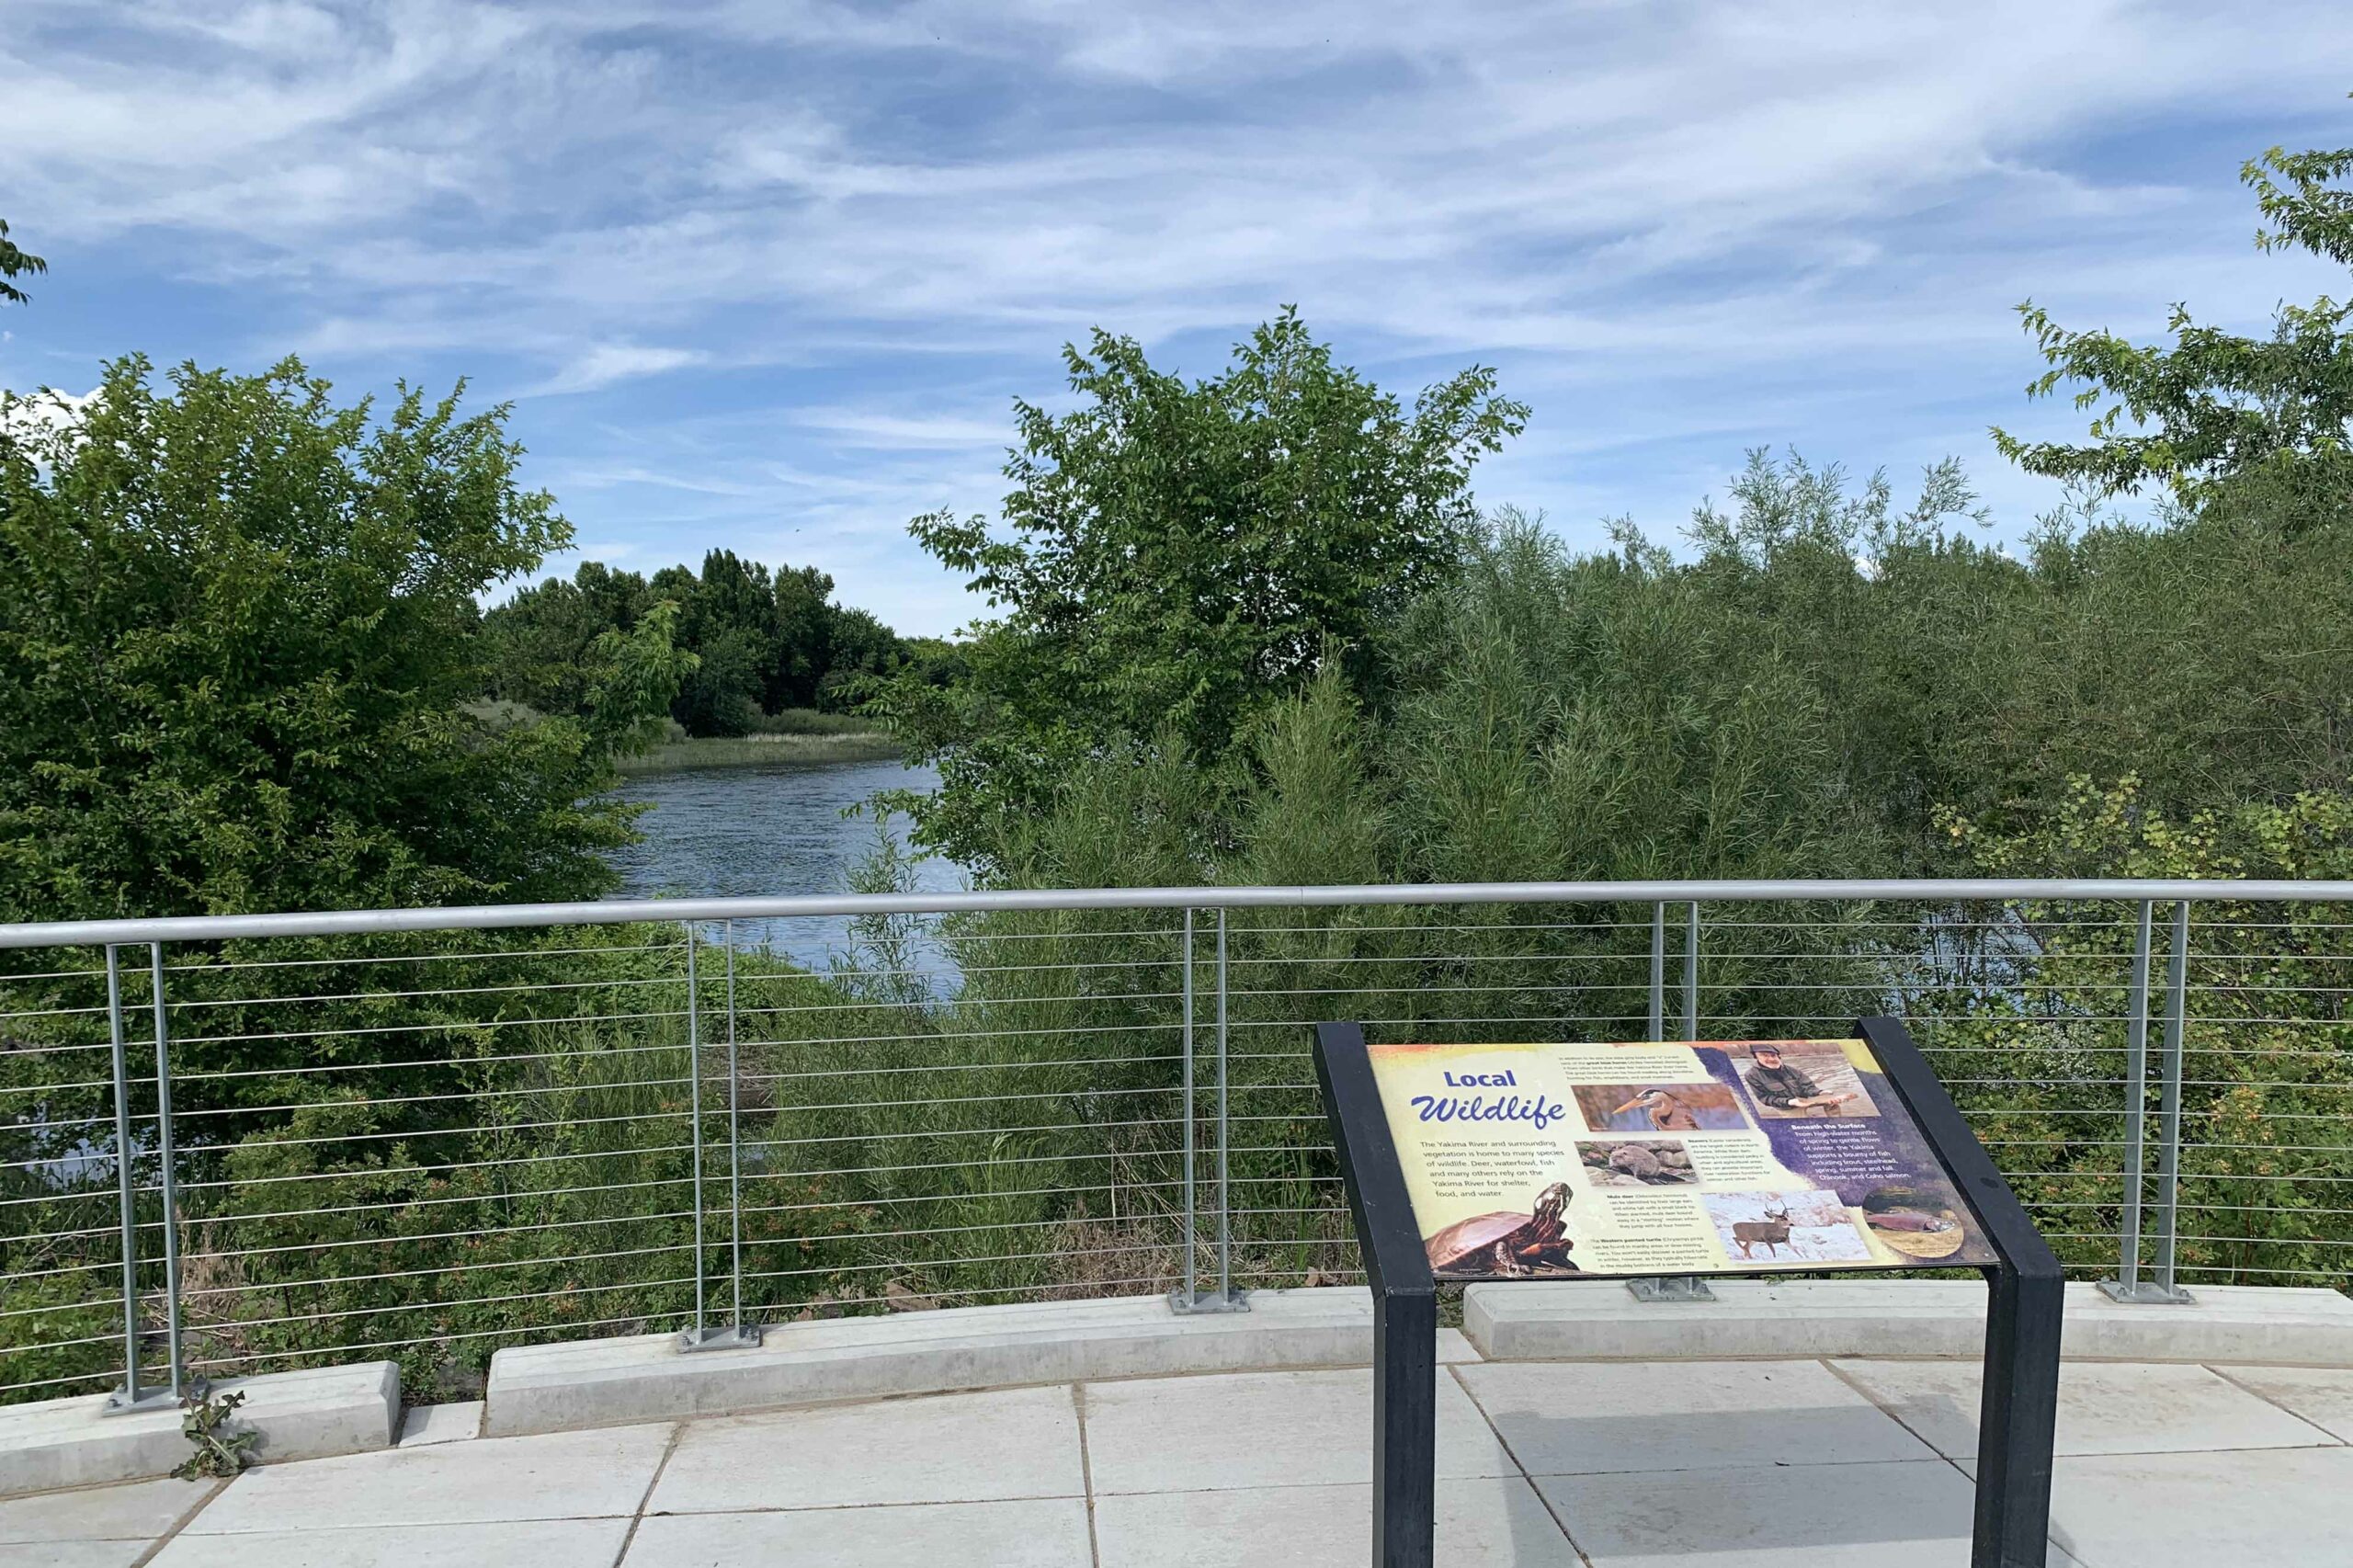 Kiosk featuring local wildlife at the Yakima River Gateway area in West Richland.